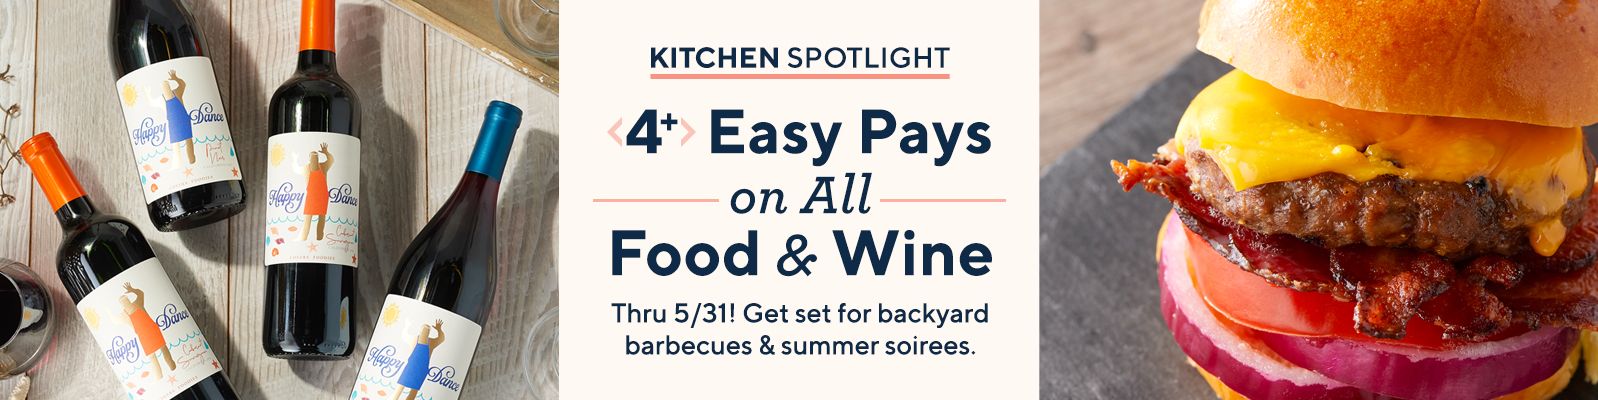 Kitchen Spotlight. 4+ Easy Pays on All Food & Wine Thru 5/31! Get set for backyard barbecues & summer soirees.